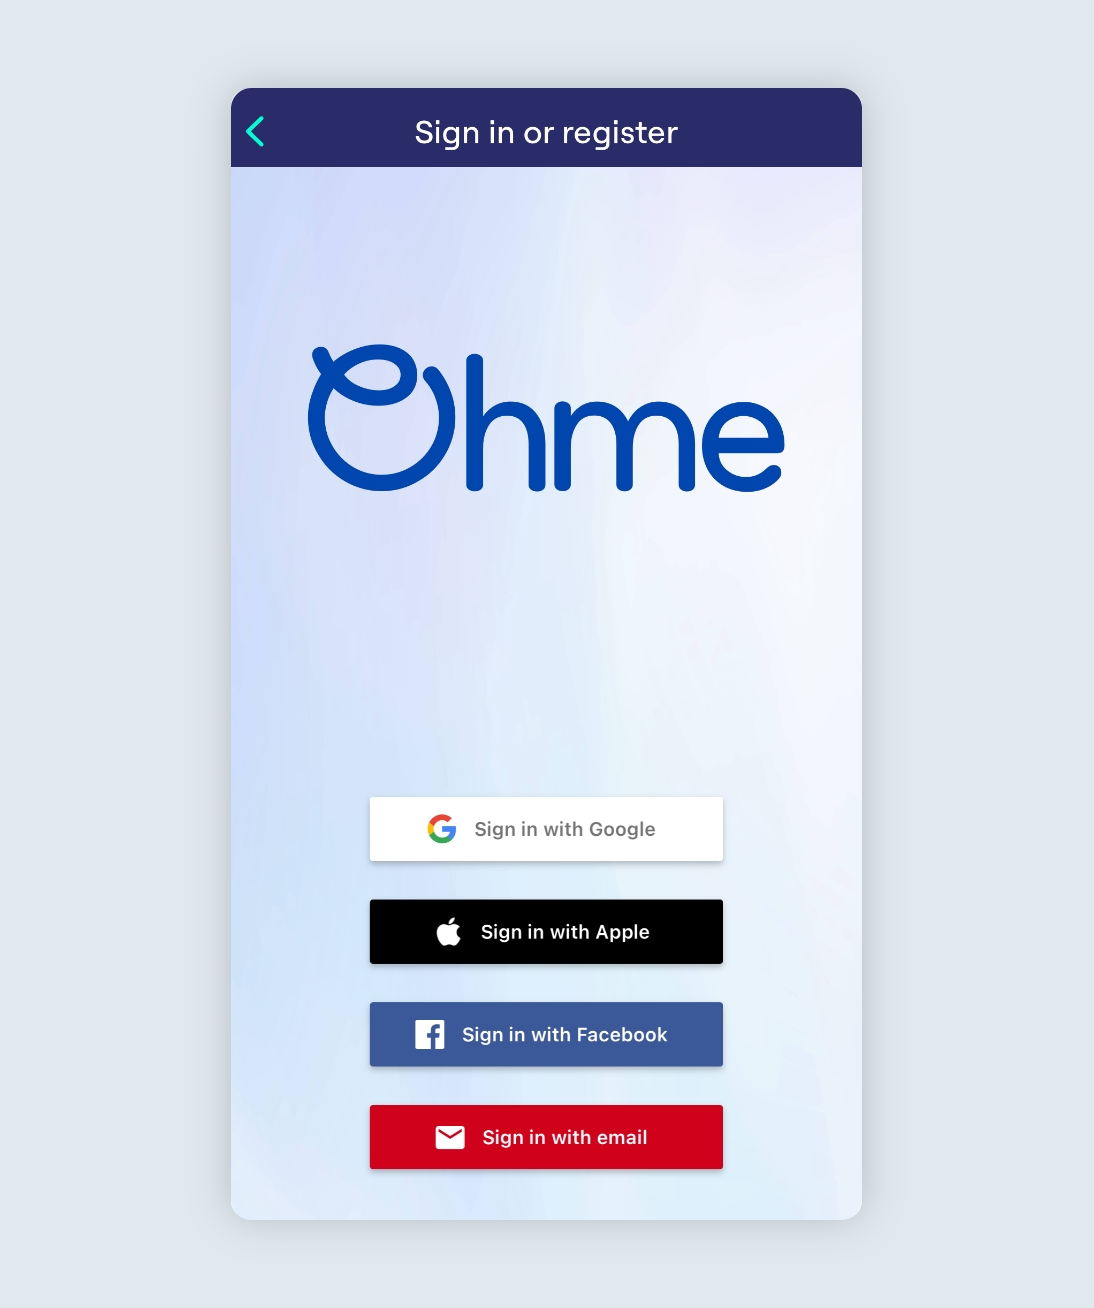 Ohme login page showing three social options and sign in with email